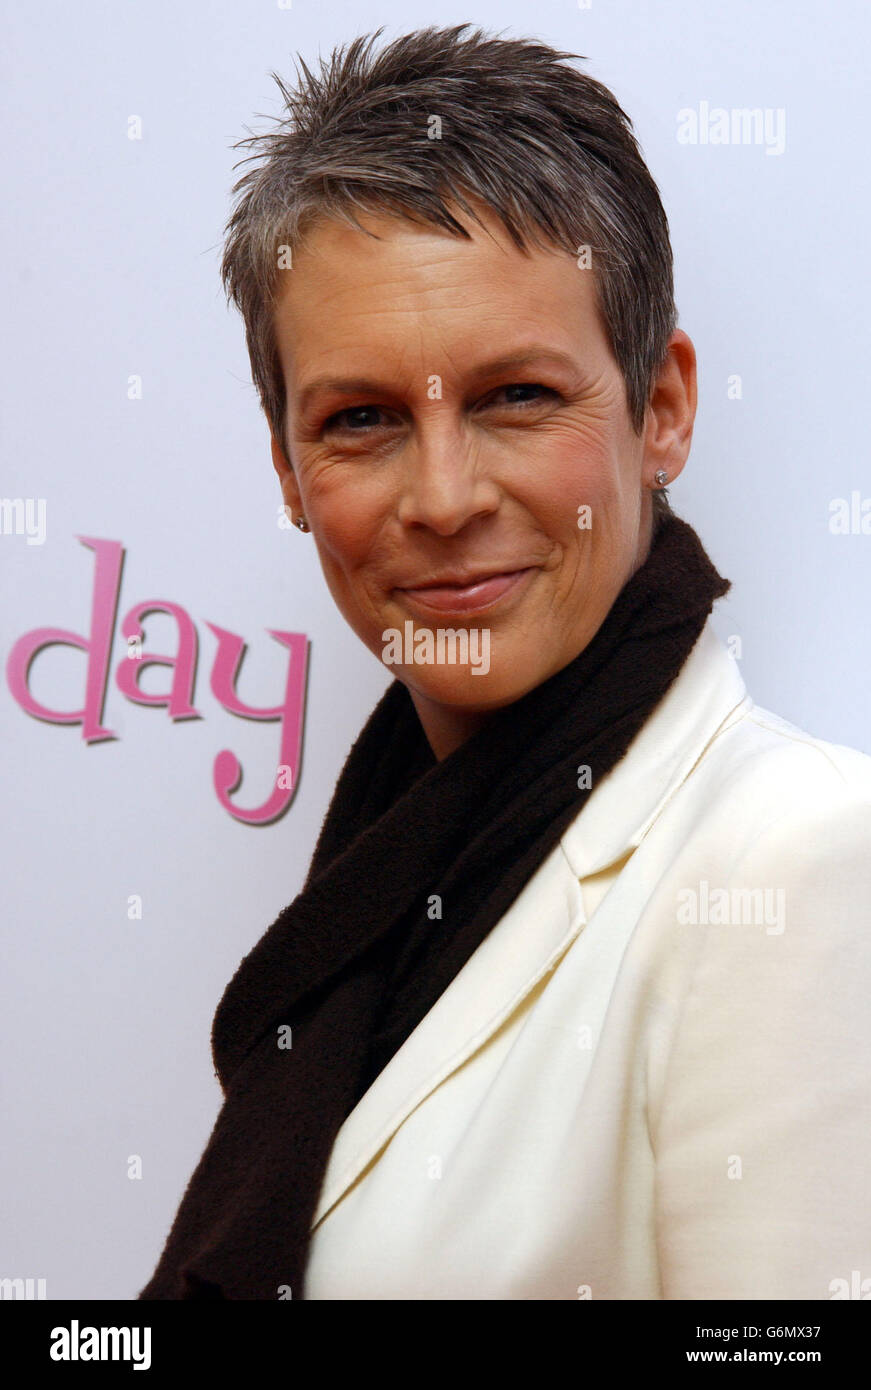 Actress Jamie Lee Curtis arrives for the premiere of her new film 'Freaky Friday' at the Odeon, Kensington High St in west London. Stock Photo